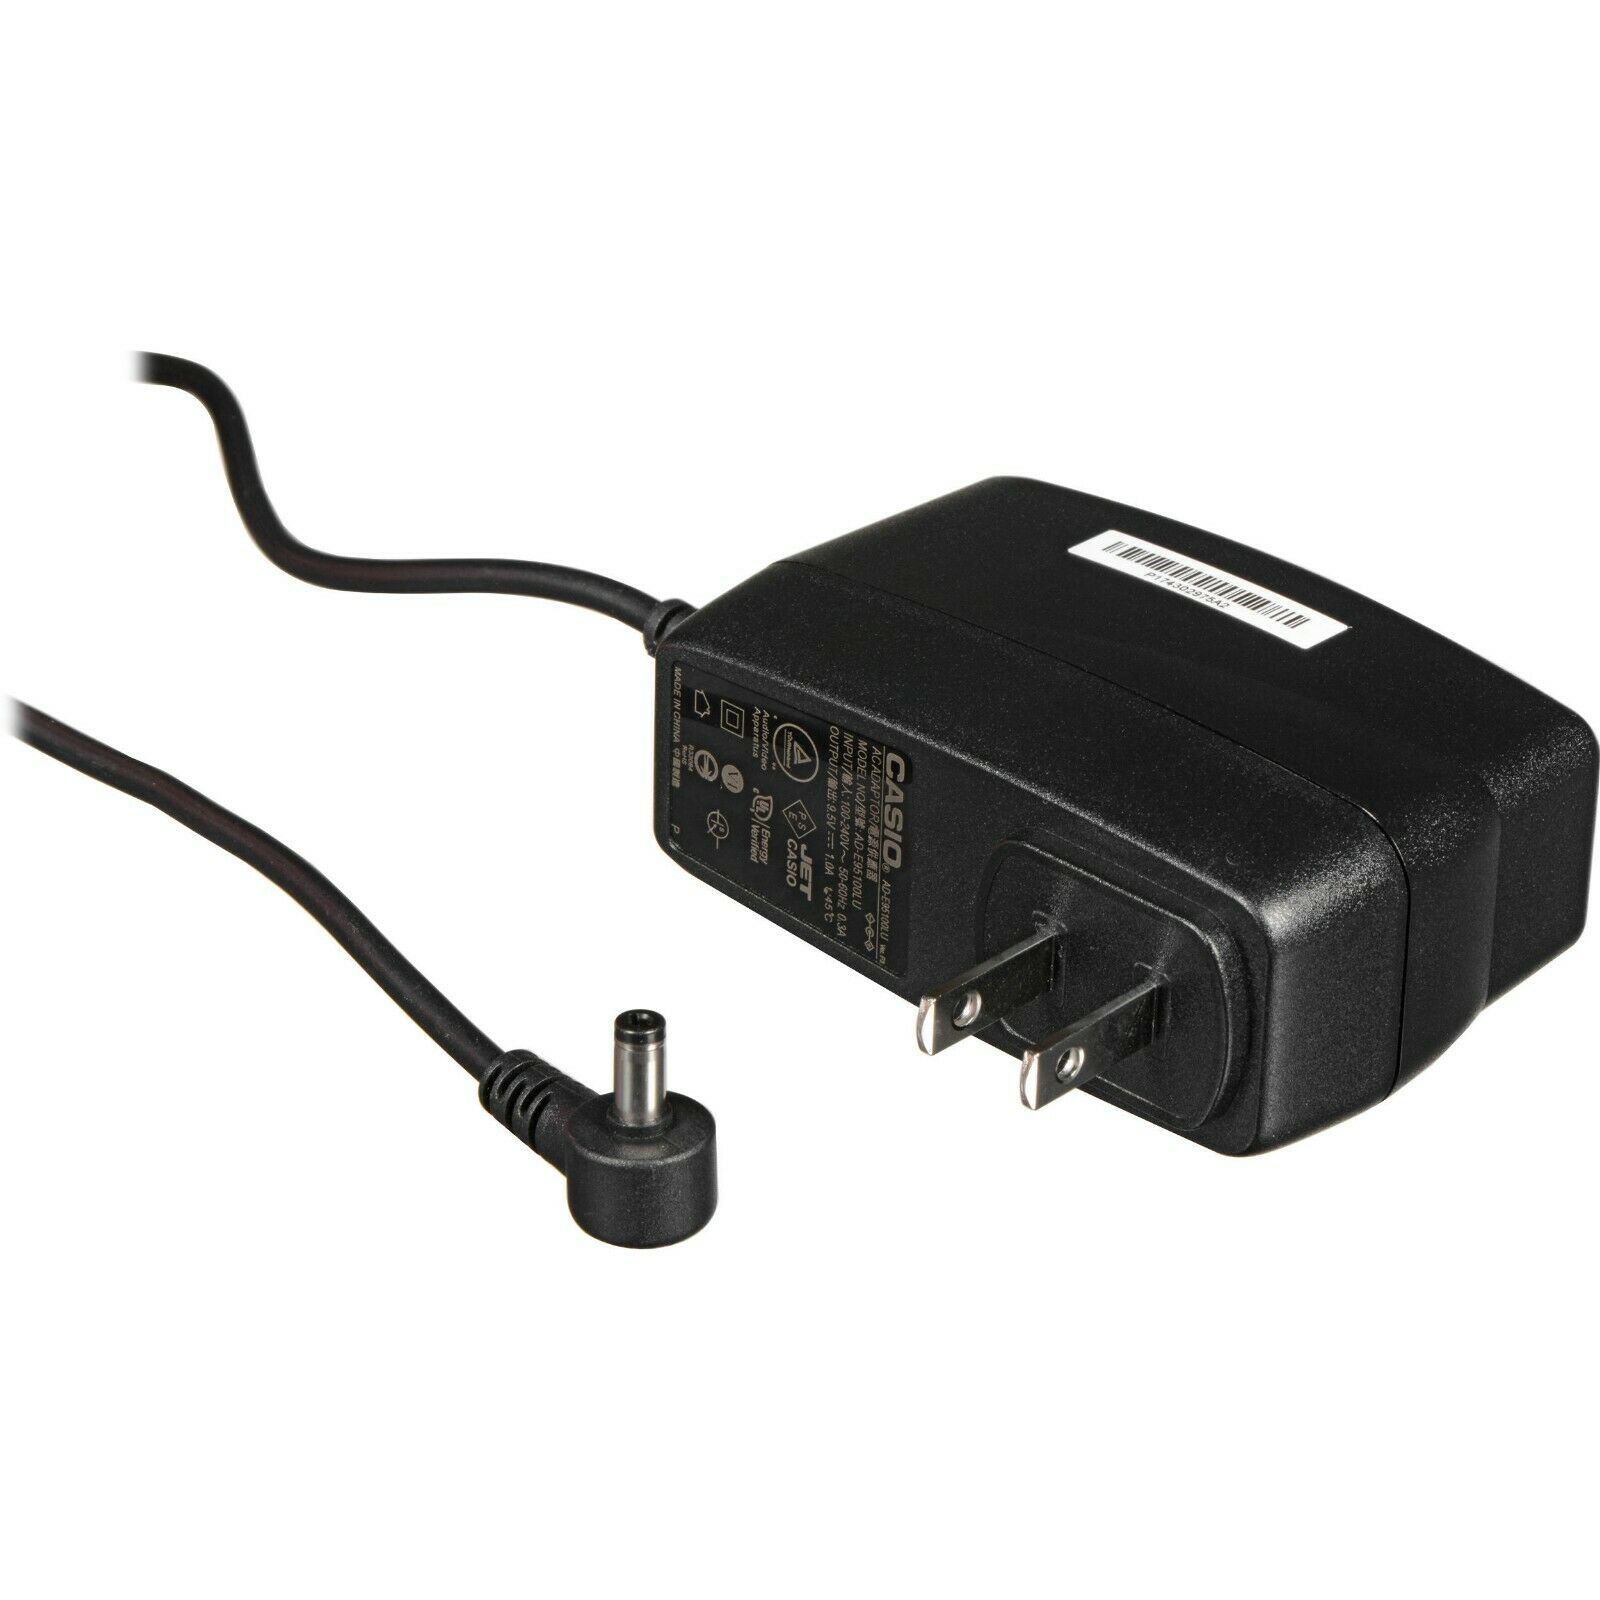 WJ-Y666-12 WJY66612 UL AC Adapter for Model WJ-Y666-12 WJY66612 Class 2 Power Cord Cable Charger PSU Item Descriptions